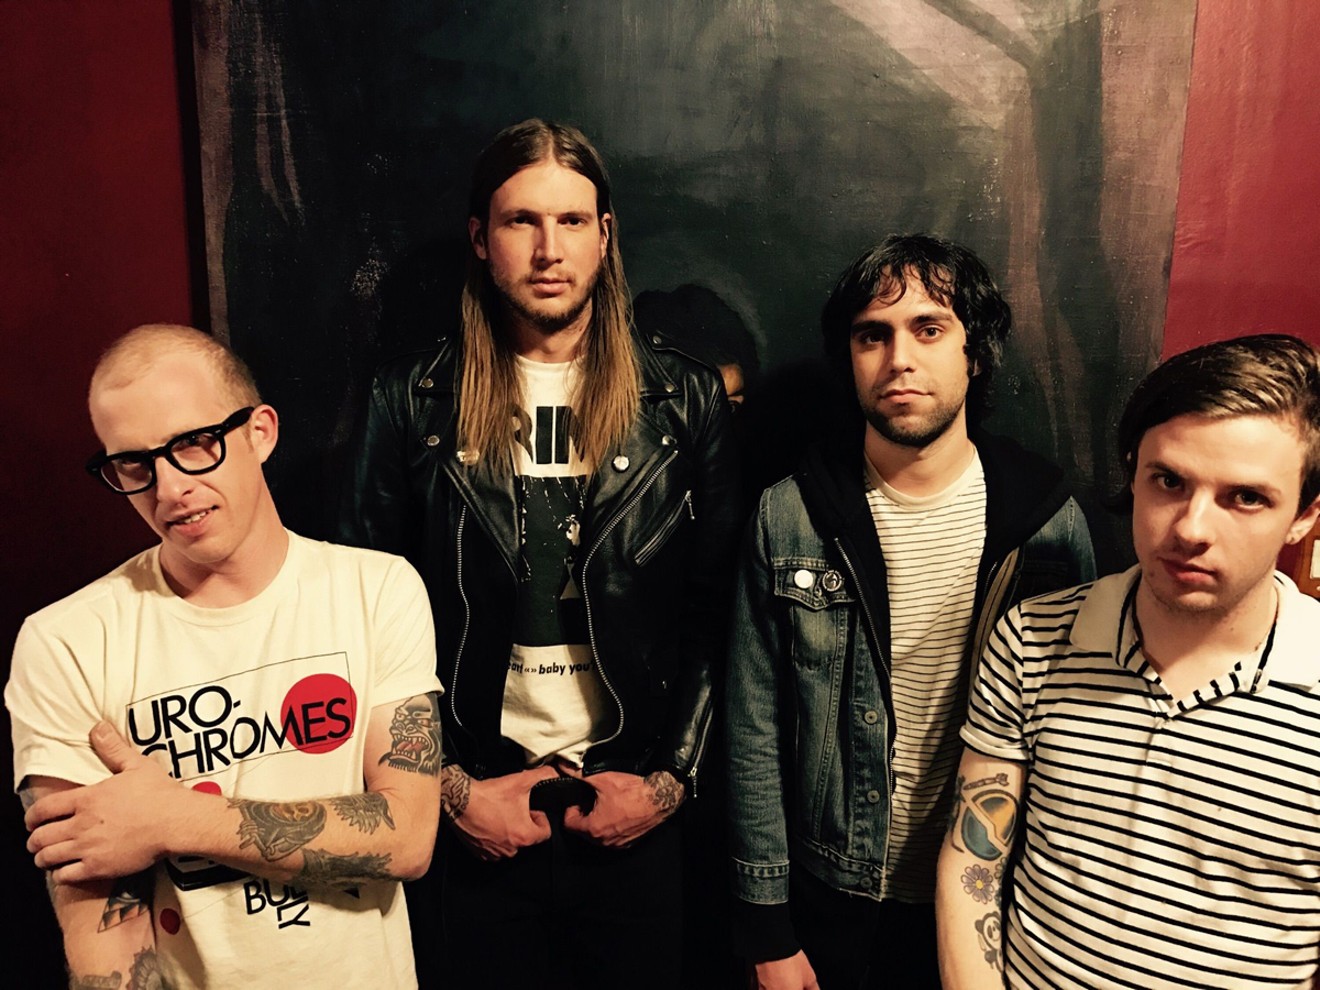 Reed Bruemmer, second from the left, plays in Poison Rites and has advice for what musicians should and shouldn't do.